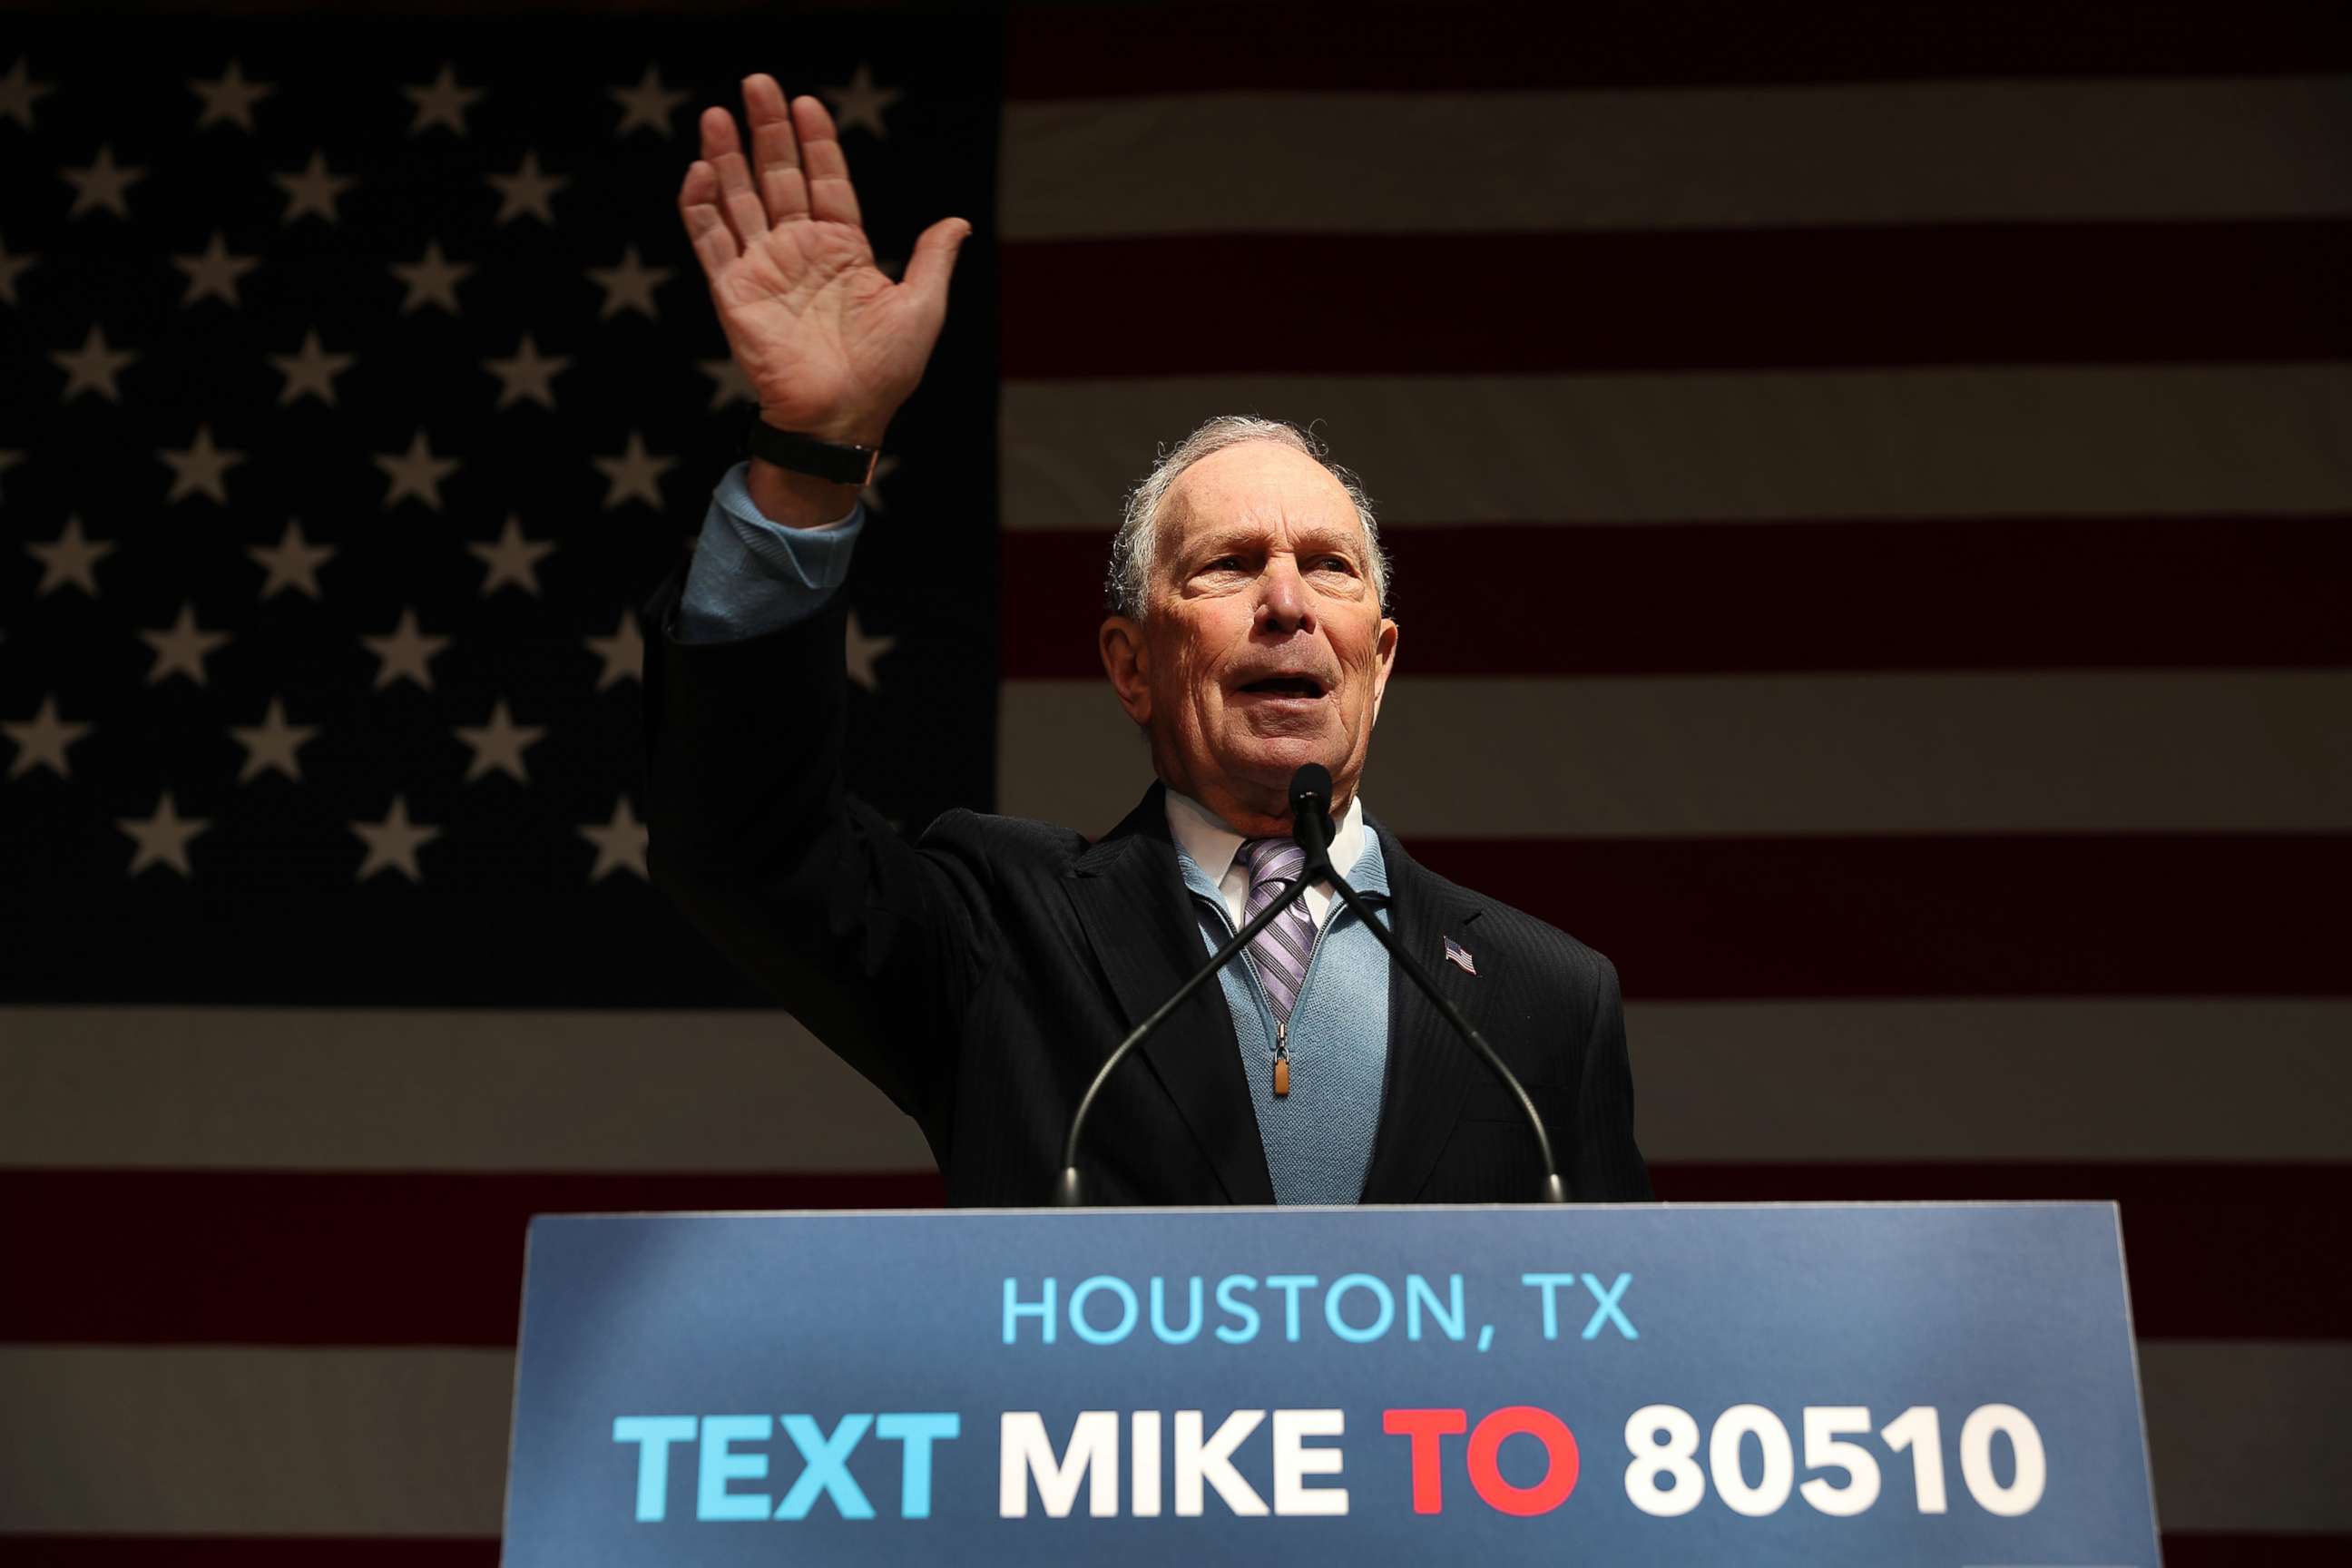 PHOTO: Democratic presidential candidate, former New York City mayor Mike Bloomberg speaks to supporters during a rally held at The Rustic, Feb. 27, 2020, in Houston, Texas.